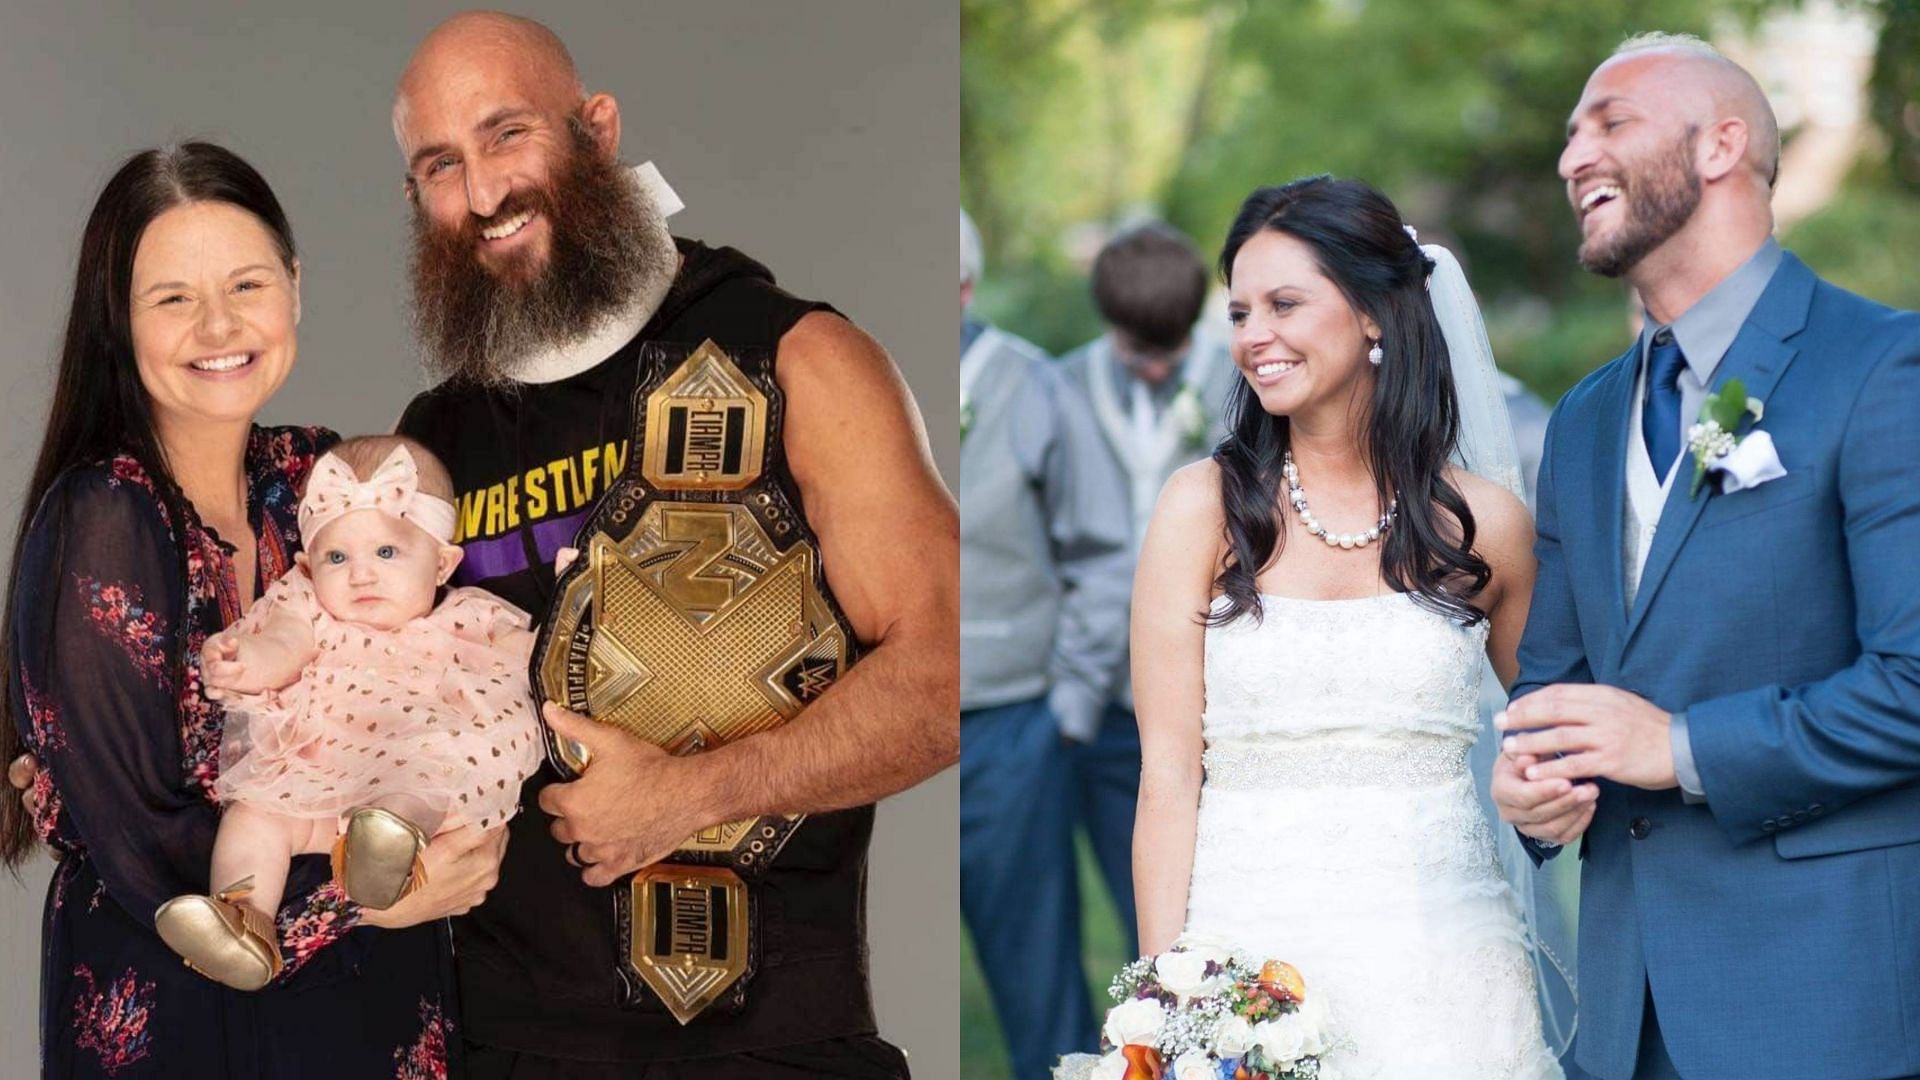 Ciampa with his wife, Jessie Ward